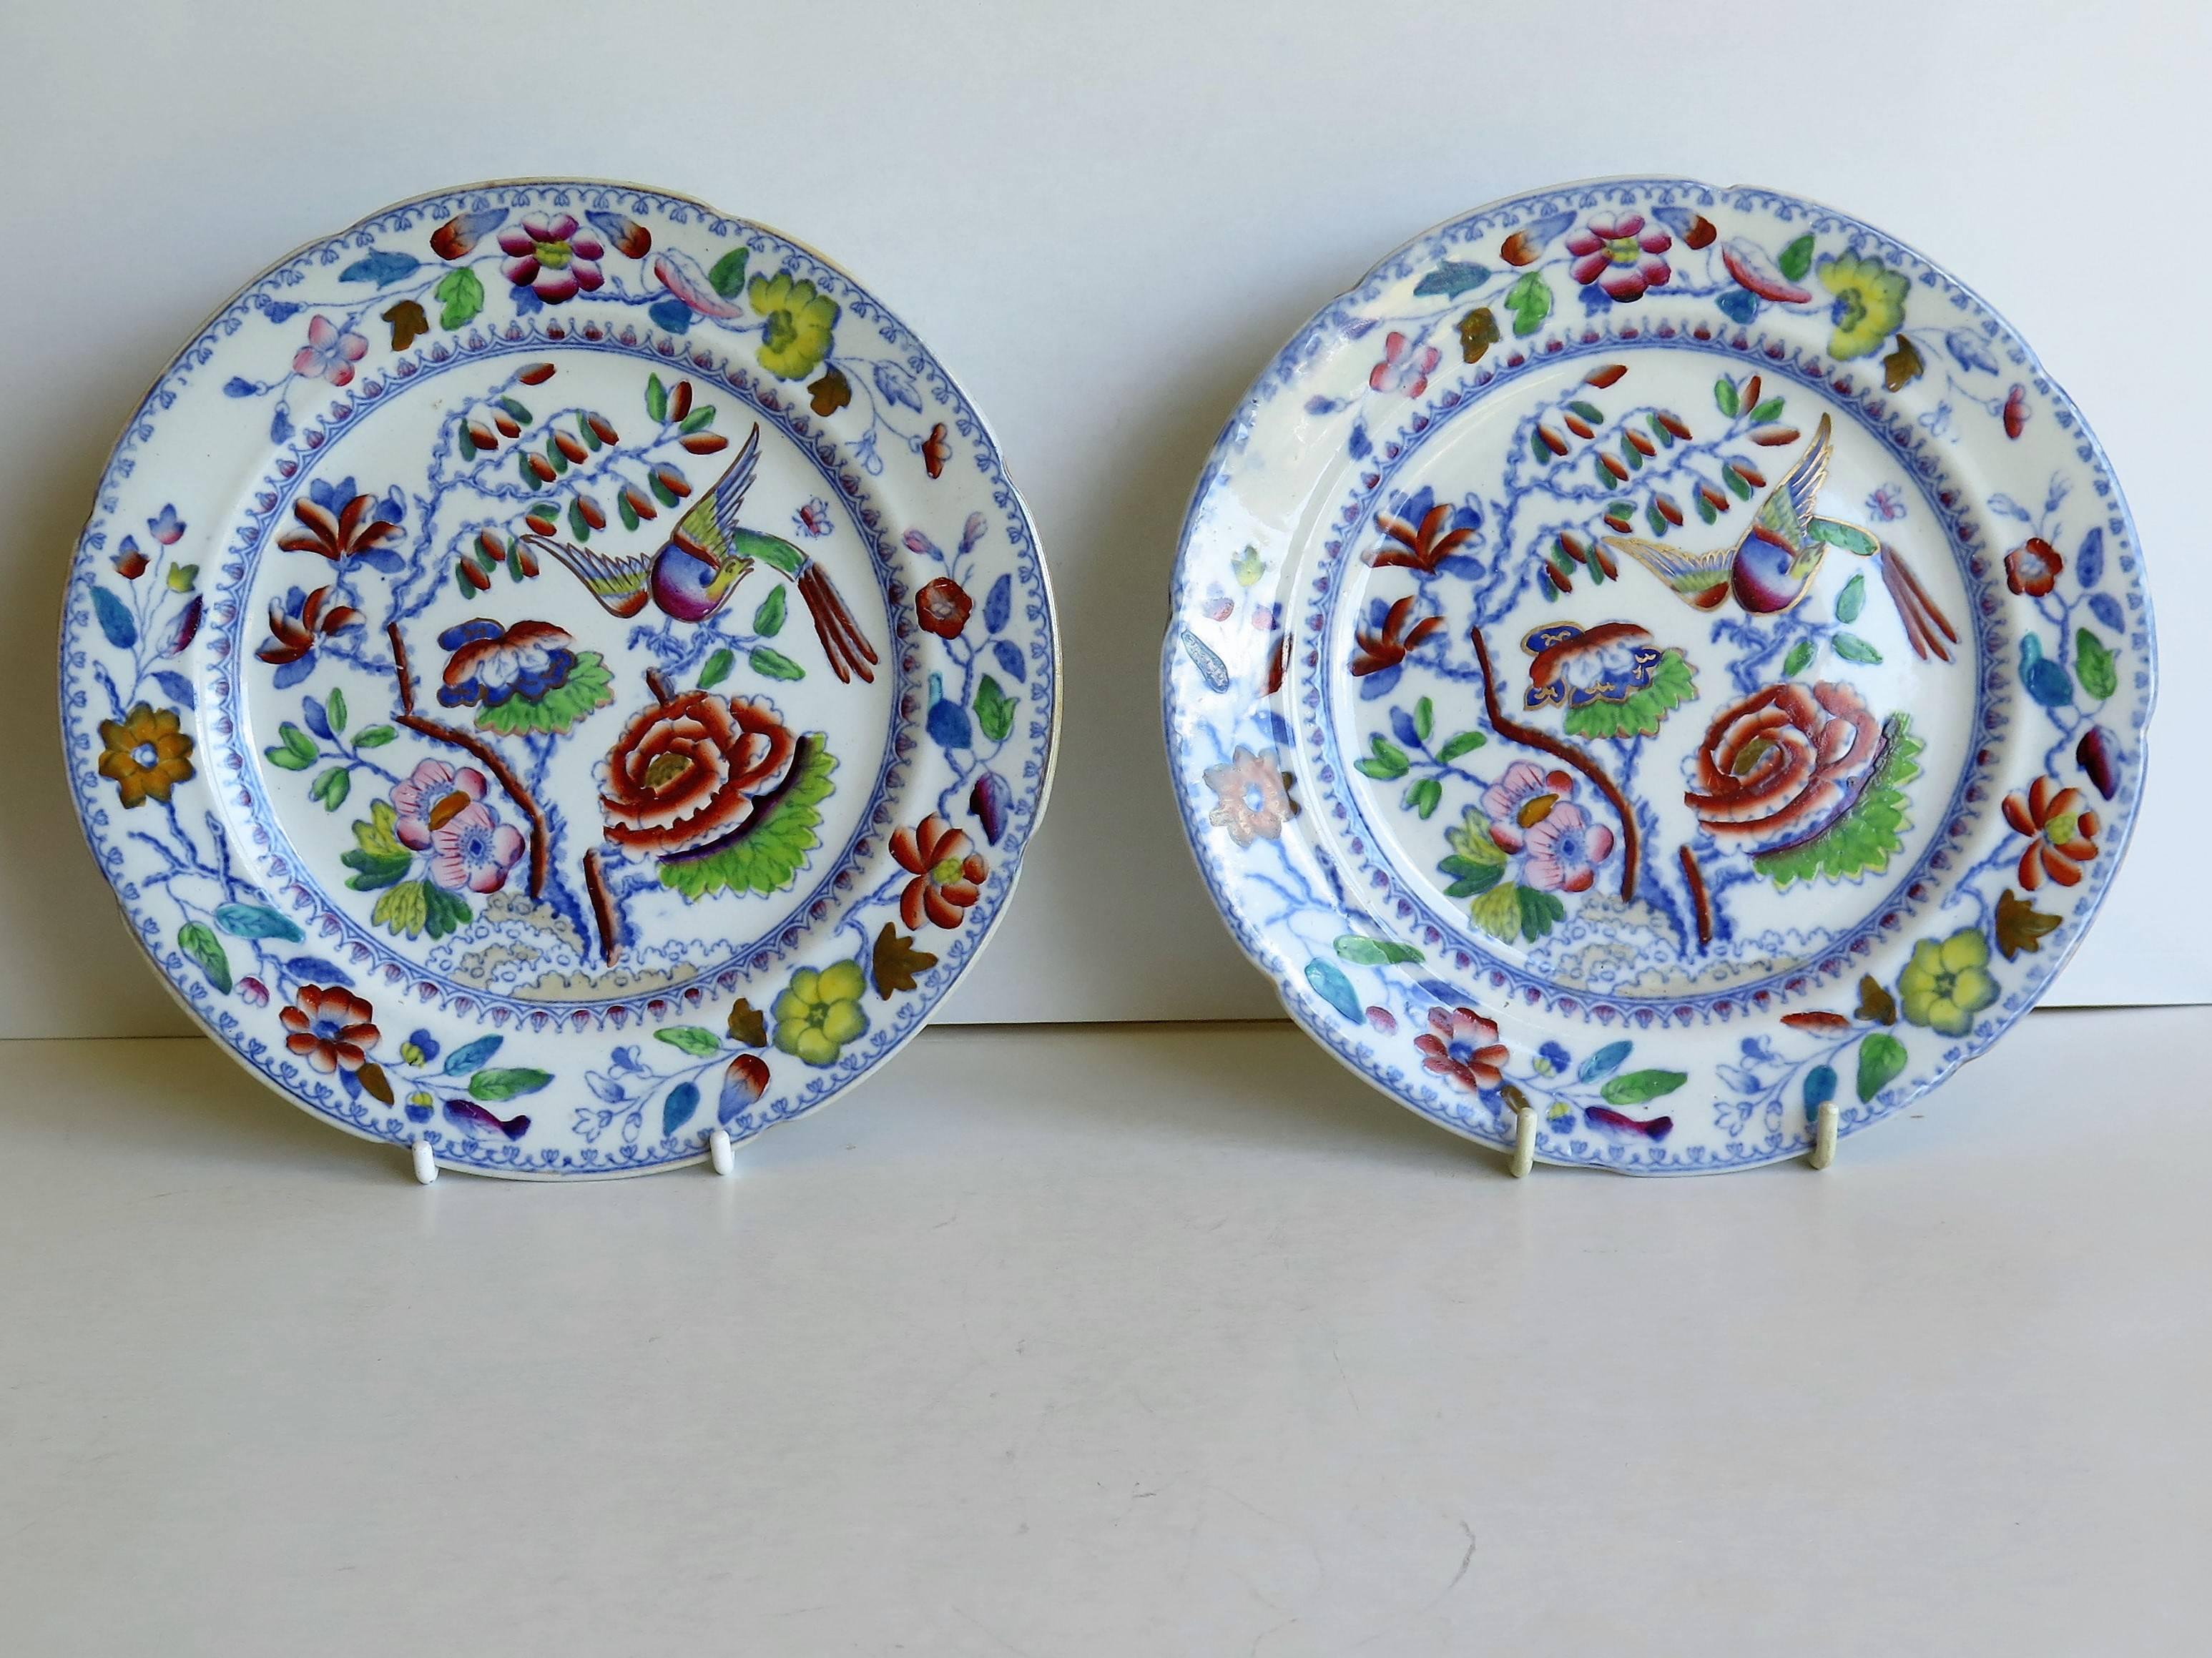 These are a very decorative pair of plates by Mason's Ironstone, England dating to the 19th Century, Circa 1870.

Each plate is circular in shape and is decorated in one of Mason's most vividly colored and sought after chinoiserie patterns. The